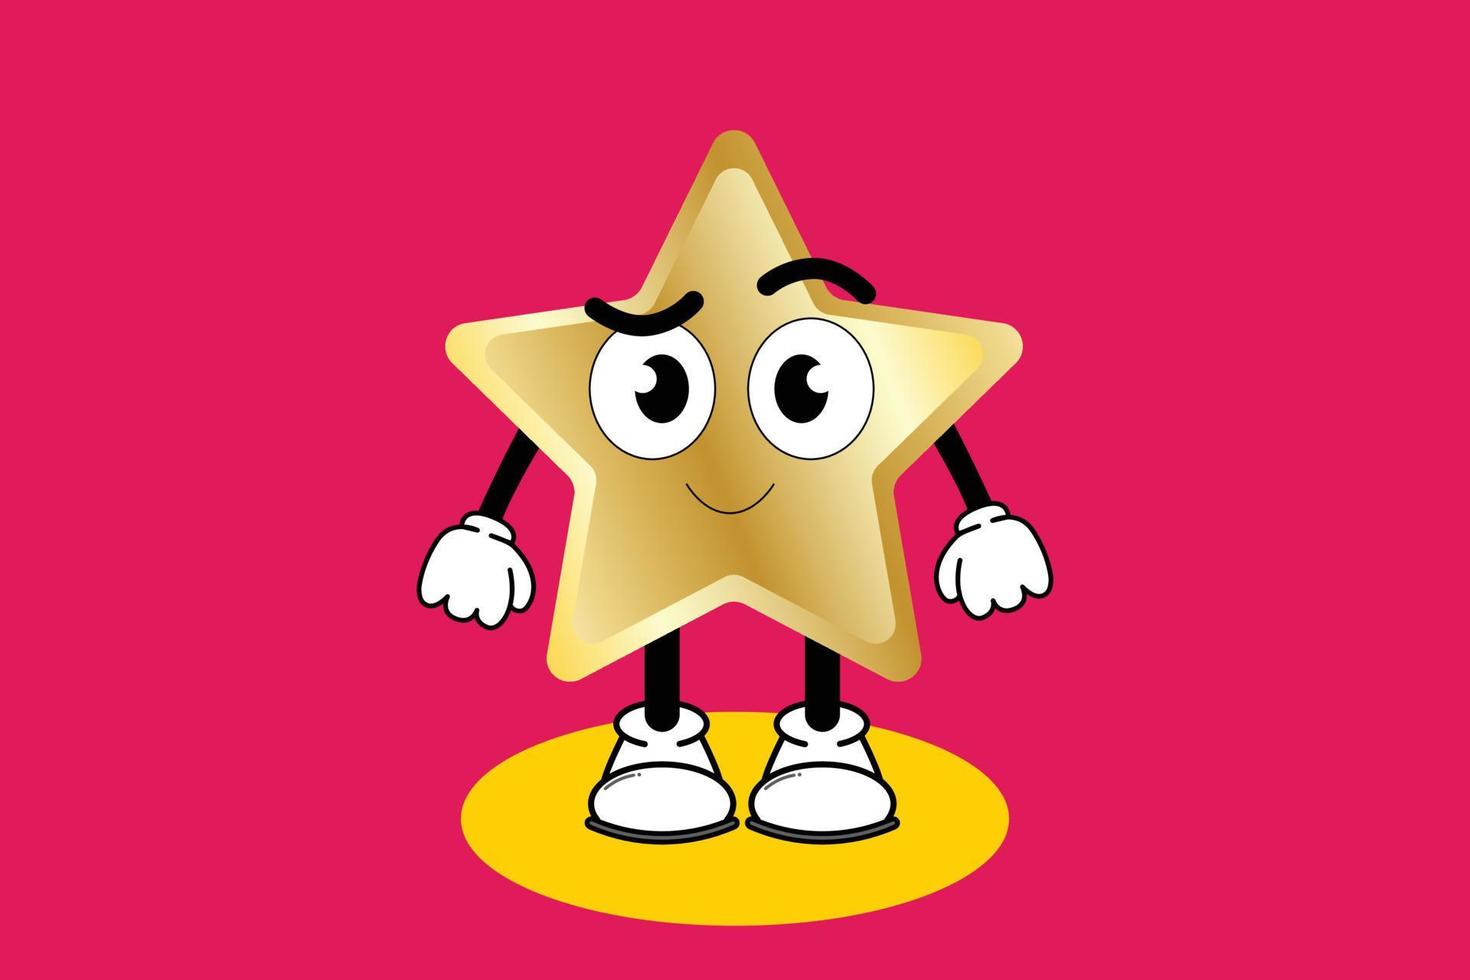 Illustration vector graphic cartoon character of cute mascot golden star with pose. Suitable for children book illustration and element design flyer,poster.